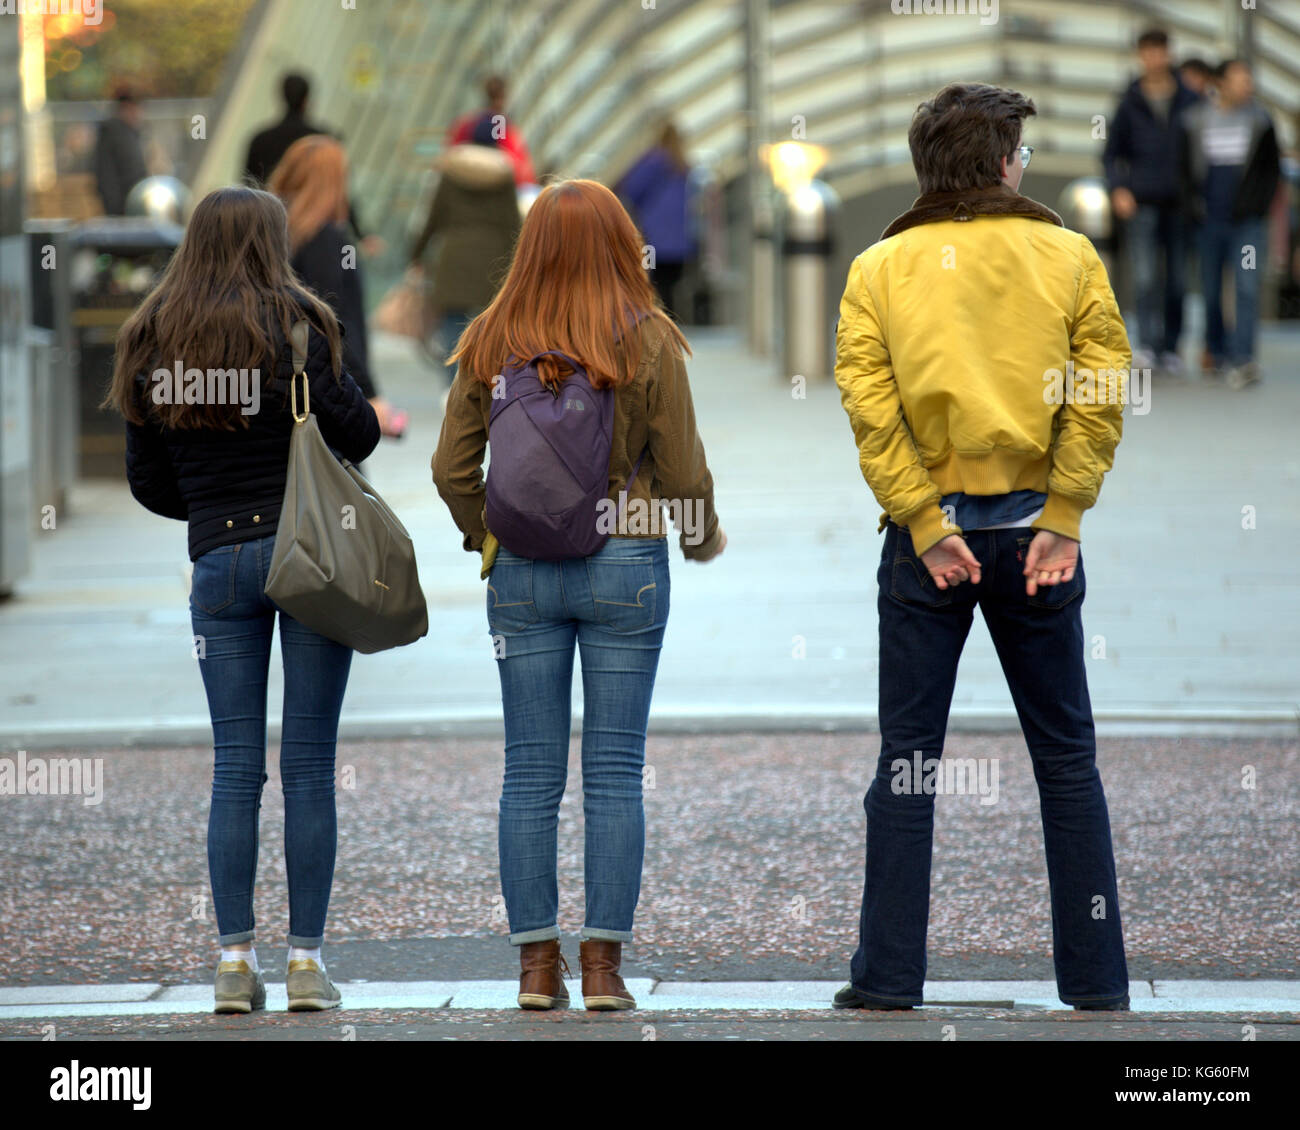 Sunny day in Glasgow and the locals take to the streets young fashion viewed from behind Stock Photo